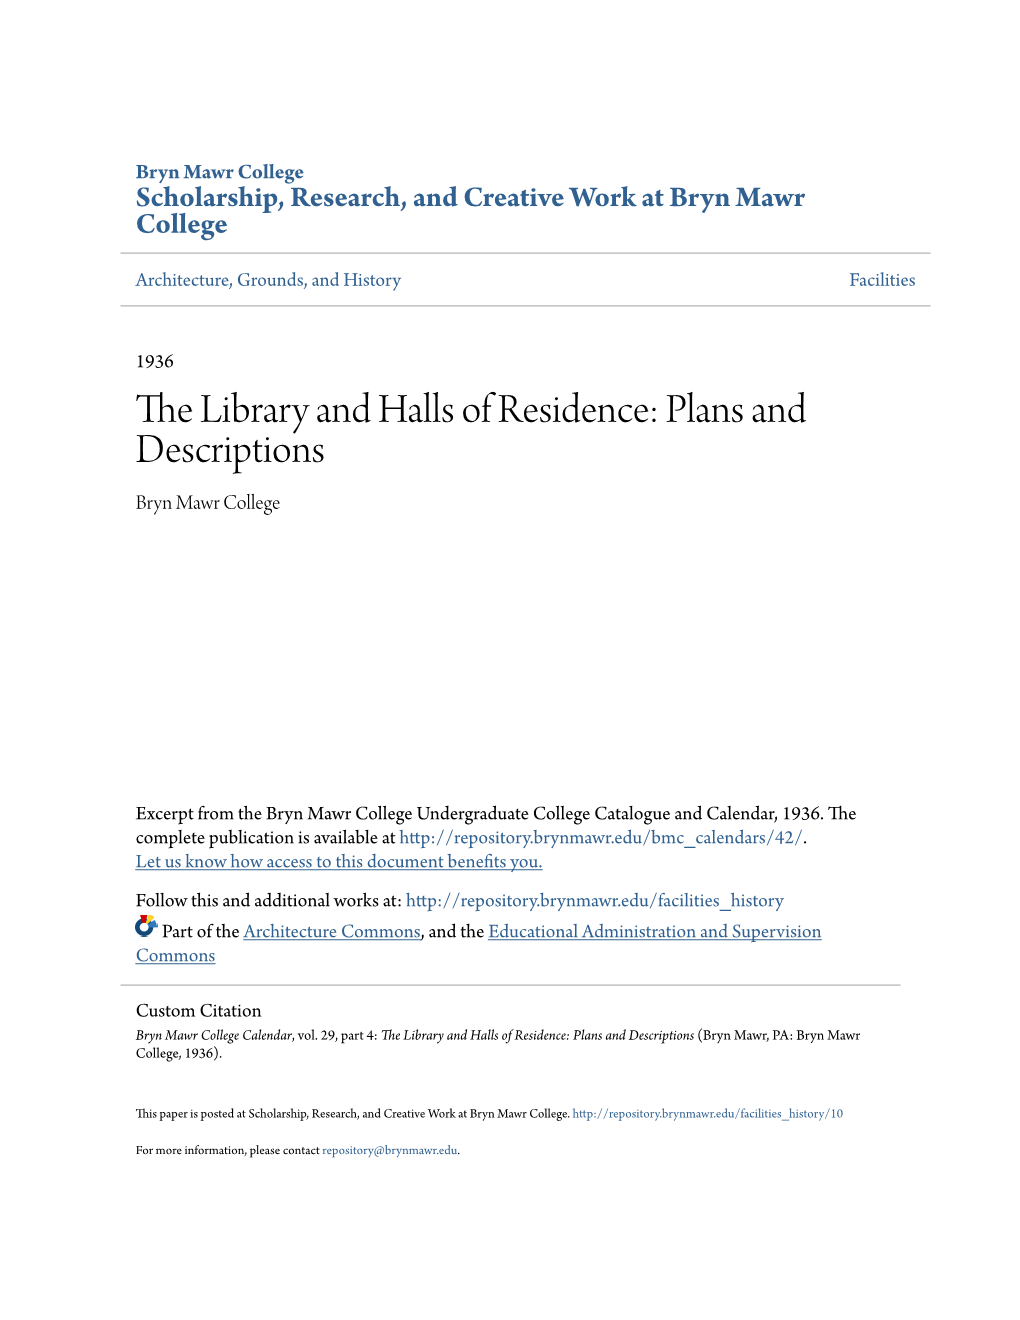 The Library and Halls of Residence: Plans and Descriptions Bryn Mawr College